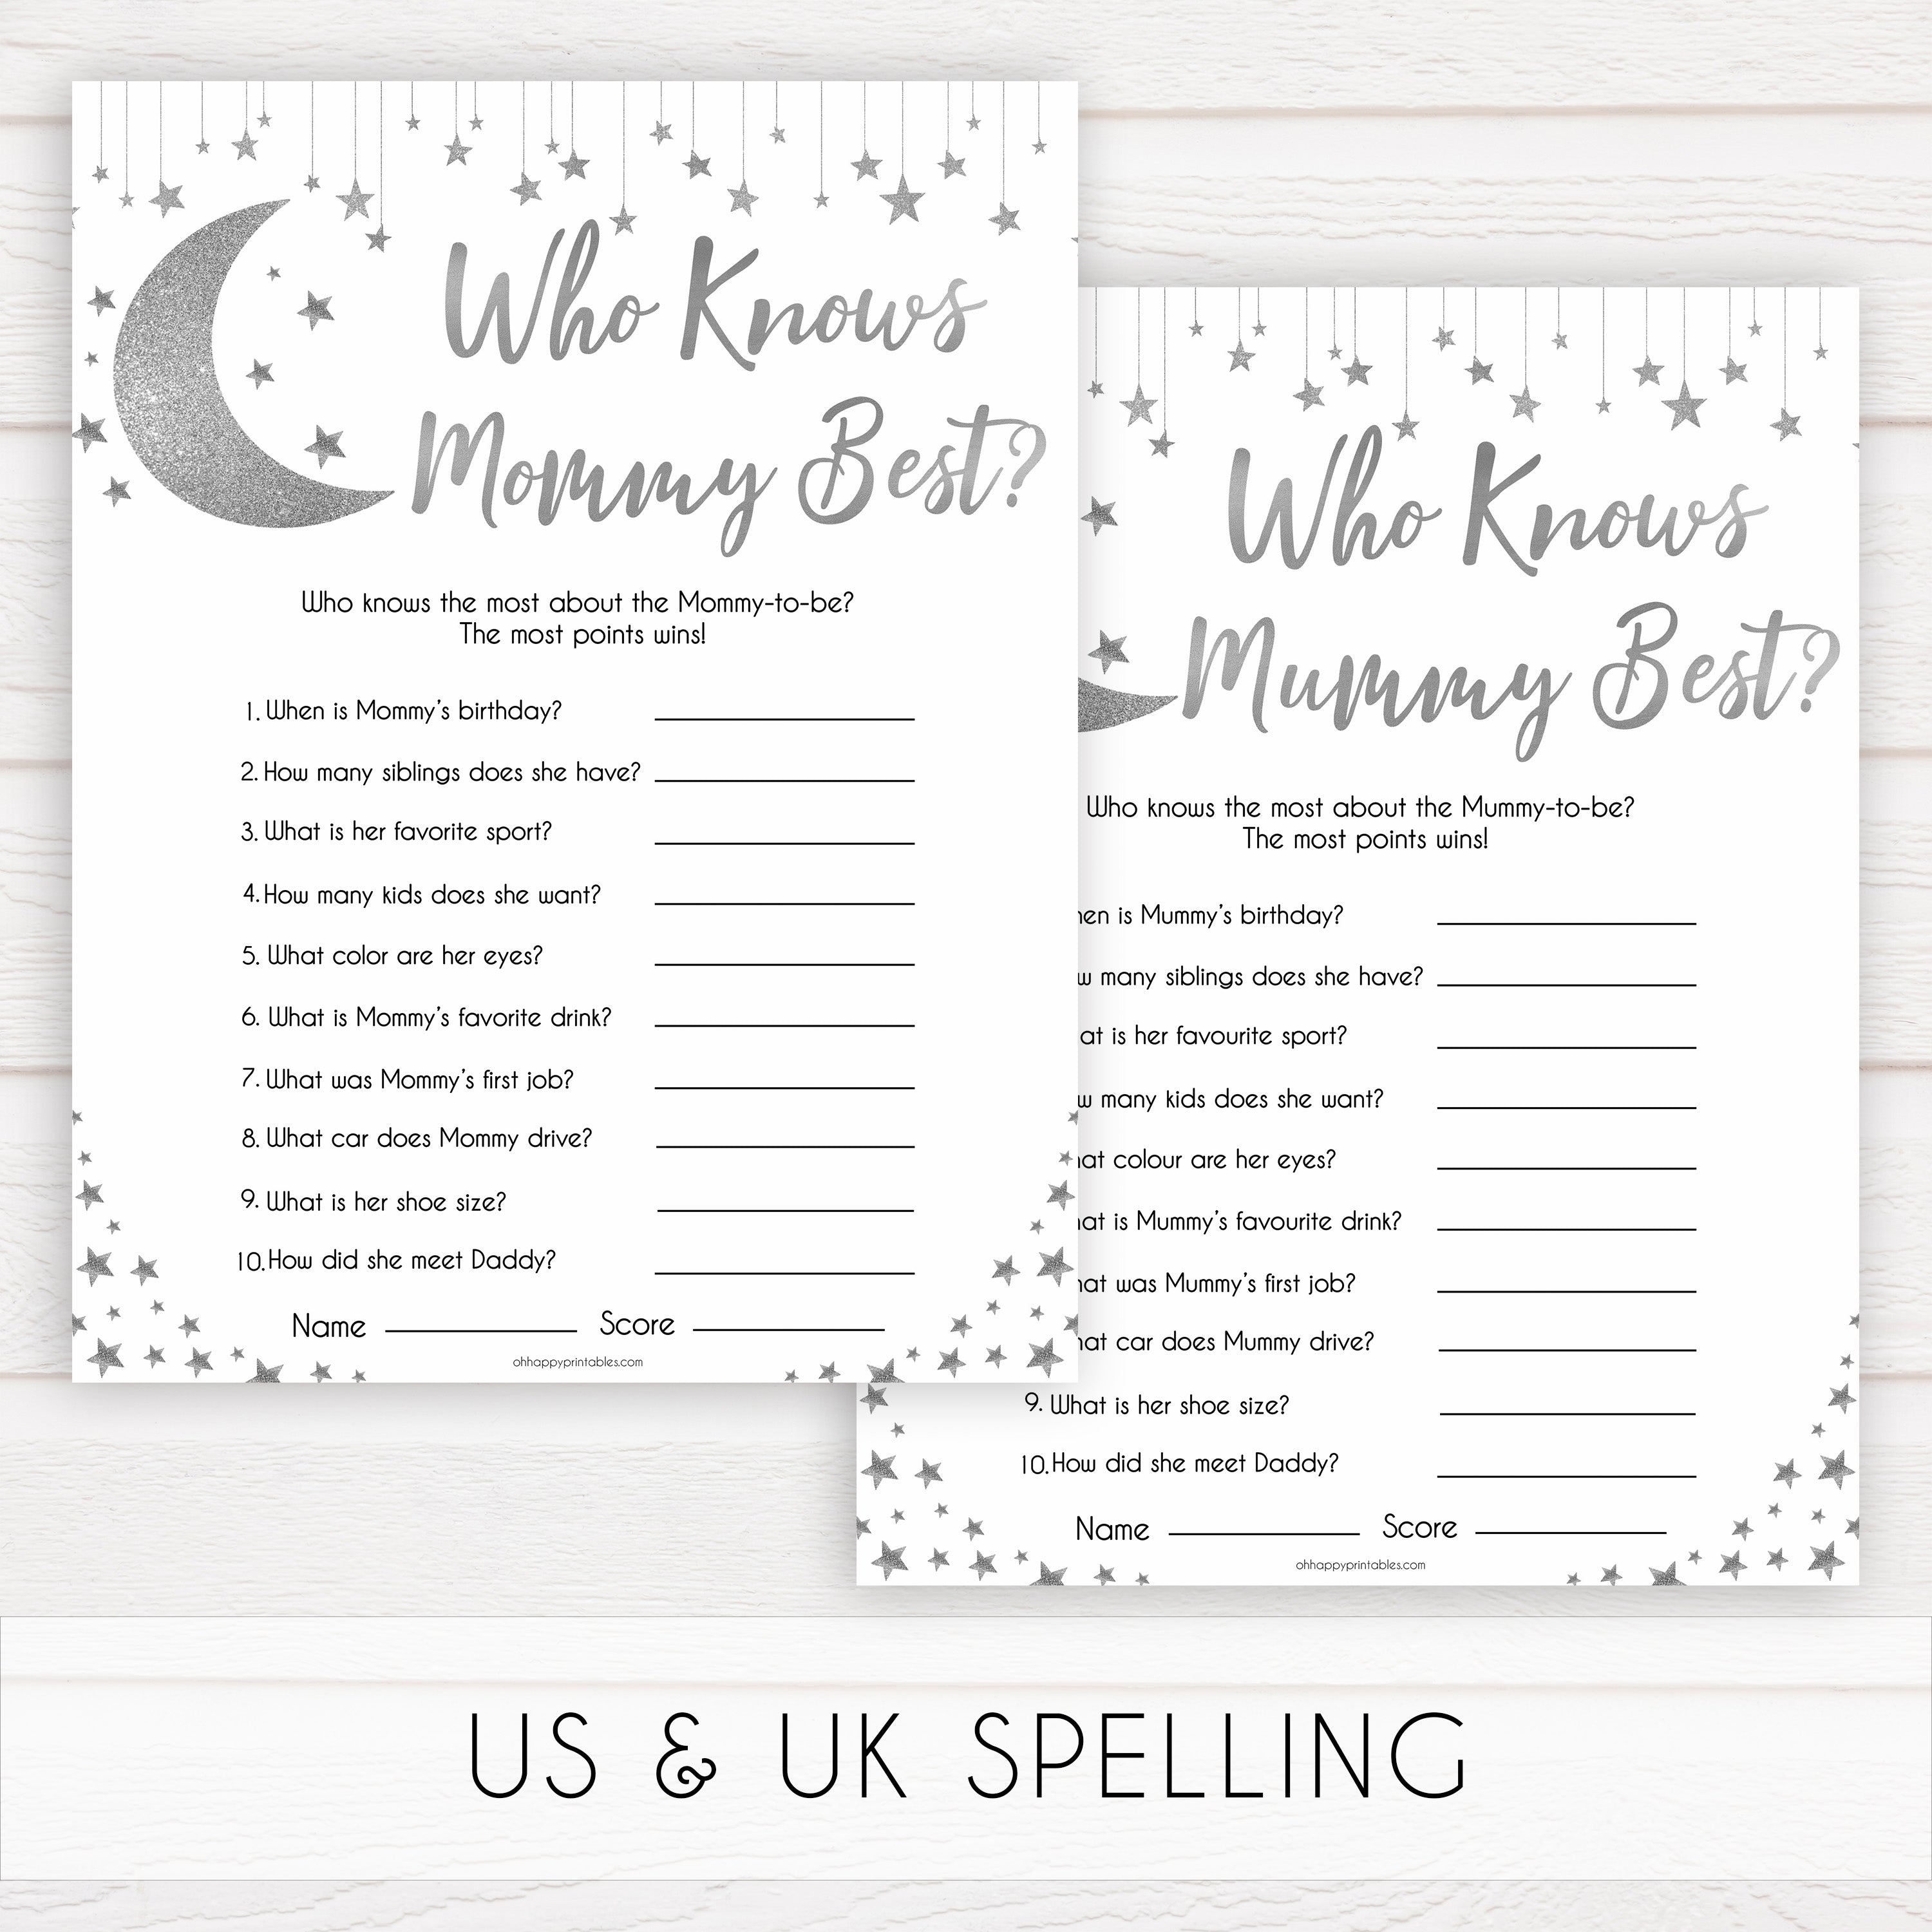 Silver little star, who knows mommy best baby games, baby shower games, printable baby games, fun baby games, twinkle little star games, baby games, fun baby shower ideas, baby shower ideas